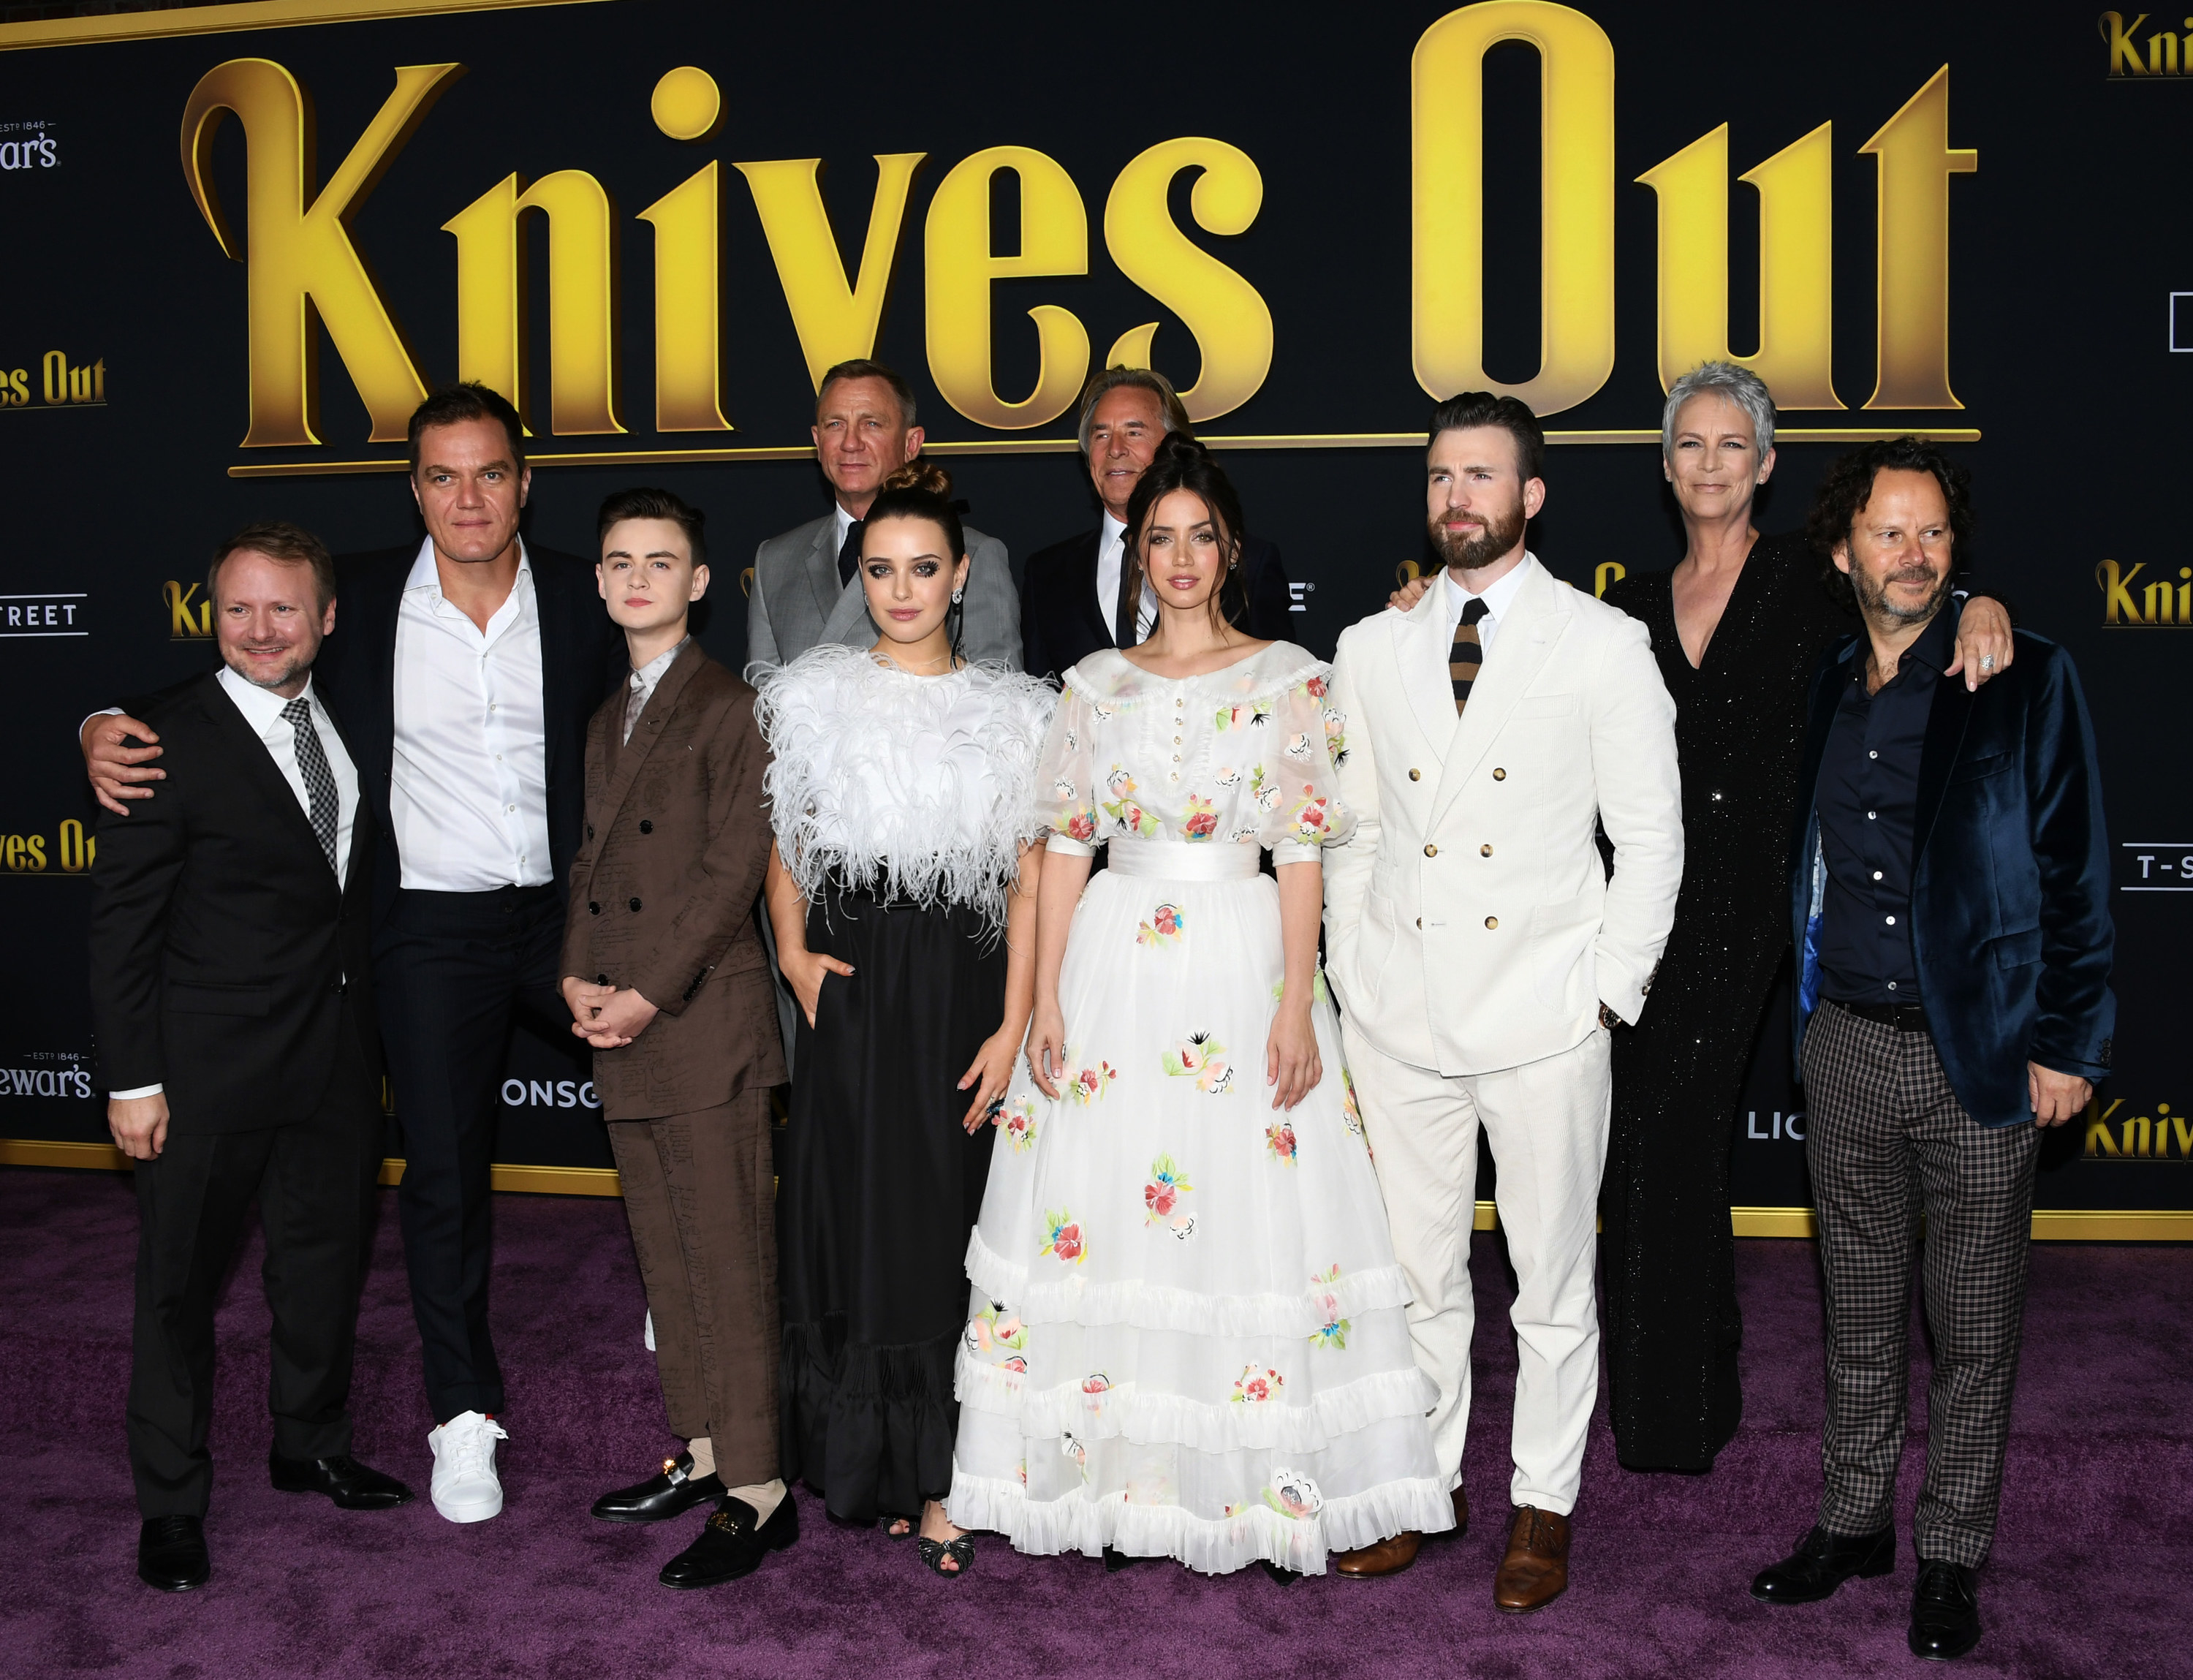 Writer and director Rian Johnson, Michael Shannon, Jaeden Martell, Daniel Craig, Katherine Langford, Don Johnson, Ana de Armas, Chris Evans, Jamie Lee Curtis, and Ram Bergman attend the 2019 premiere of &quot;Knives Out&quot; in Westwood, California